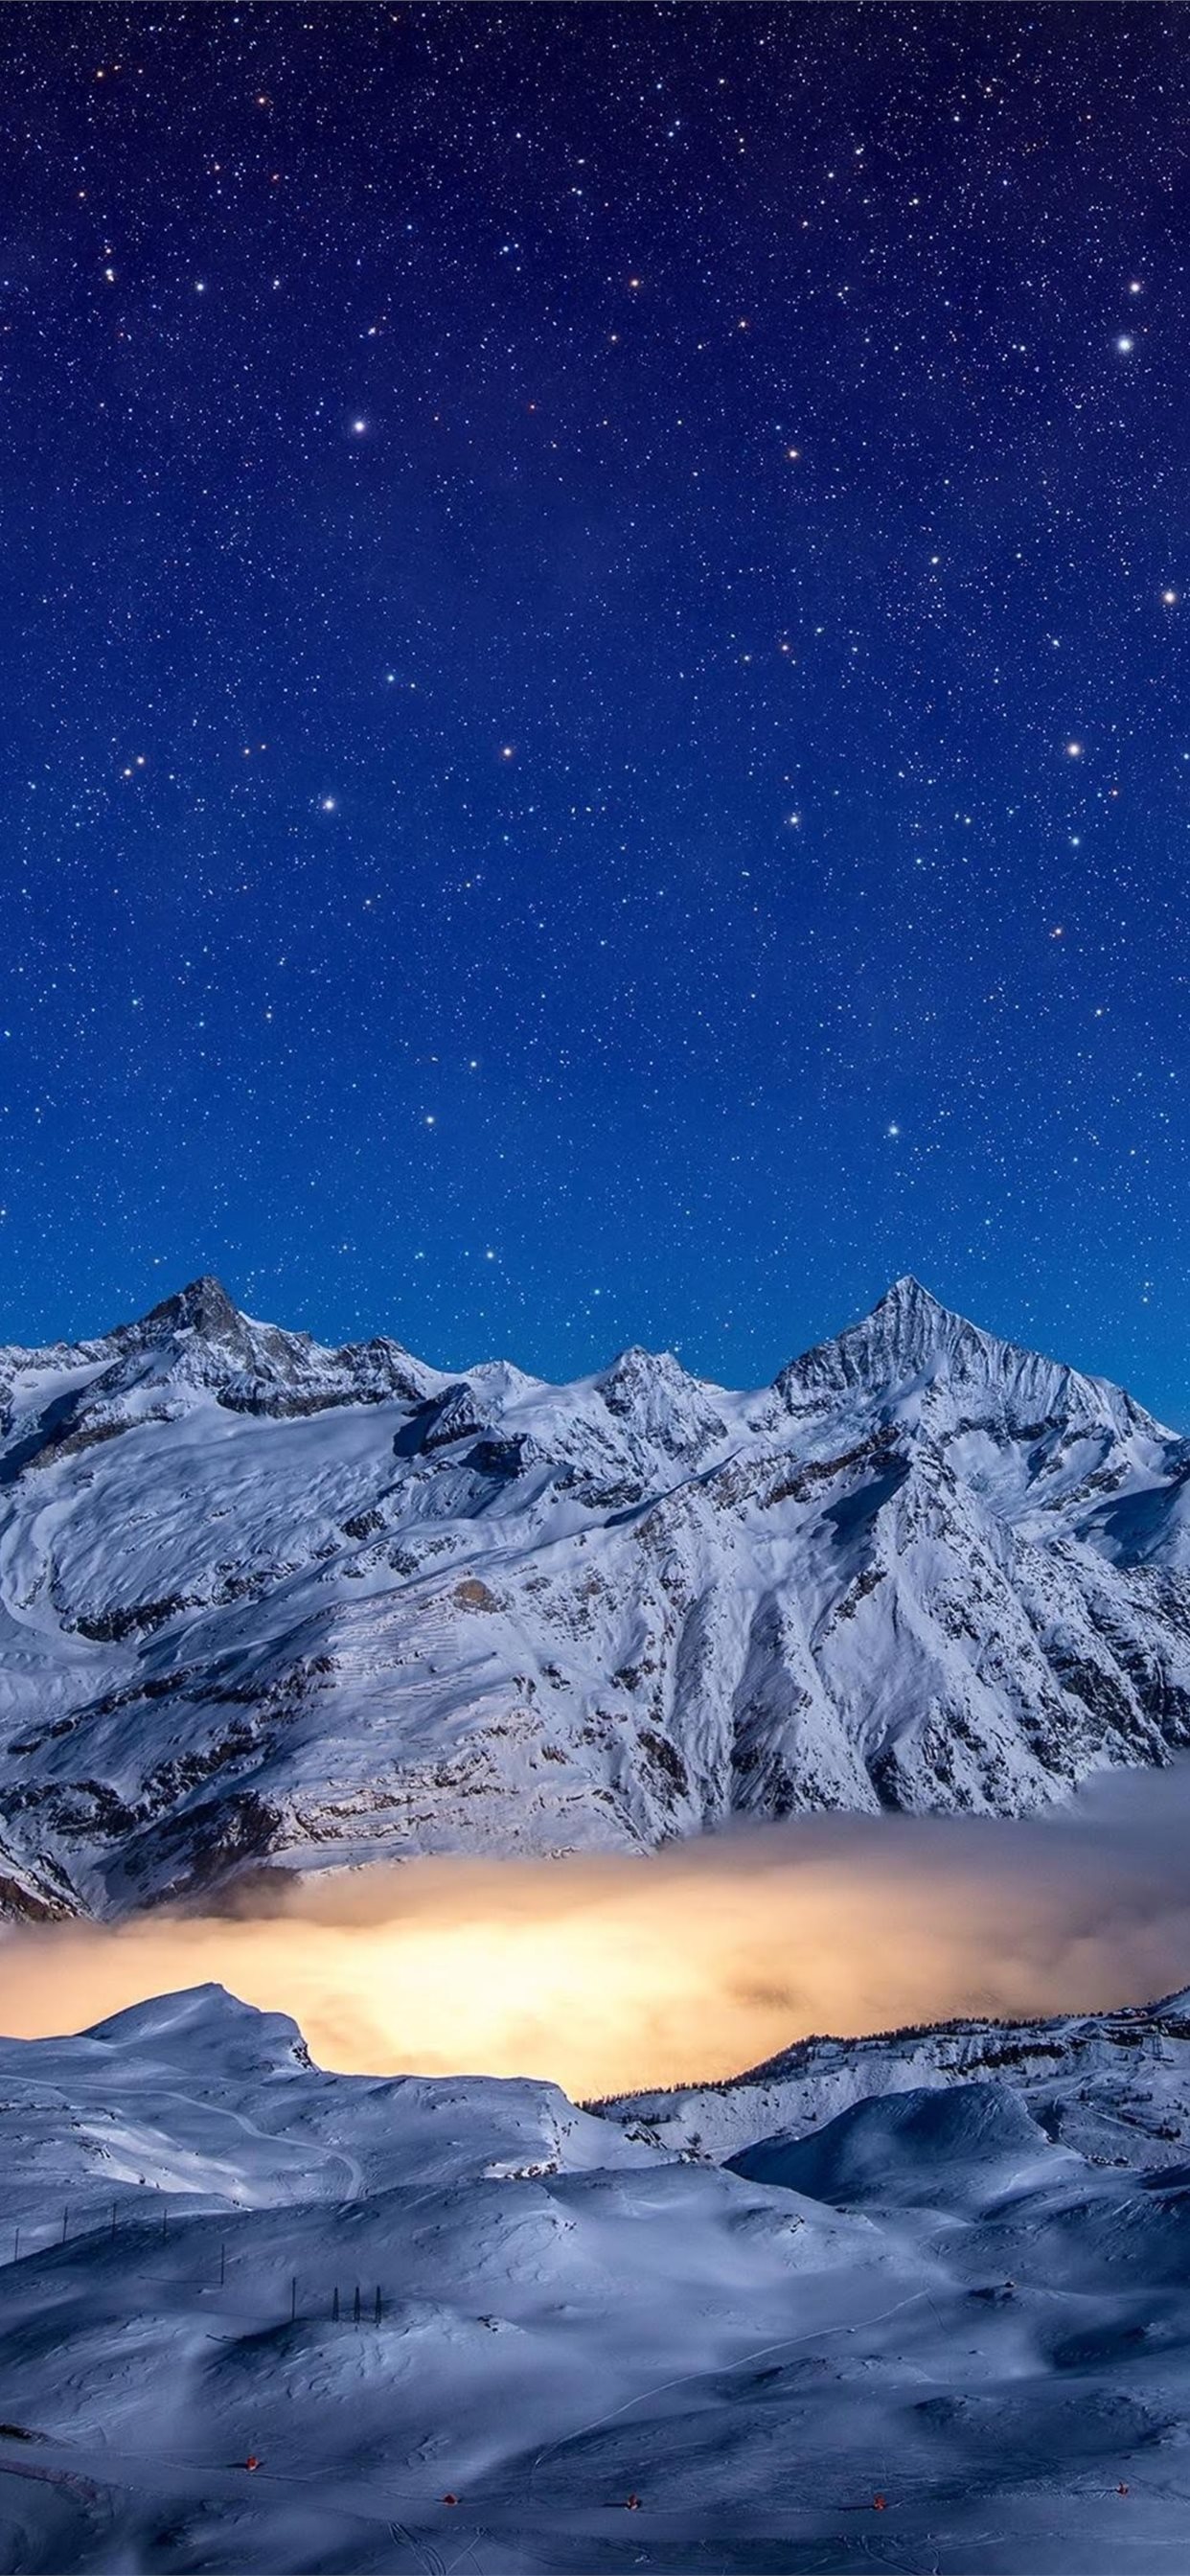 HD wallpaper mountain during night village in the middle of mountains  turnon lights  Wallpaper Flare